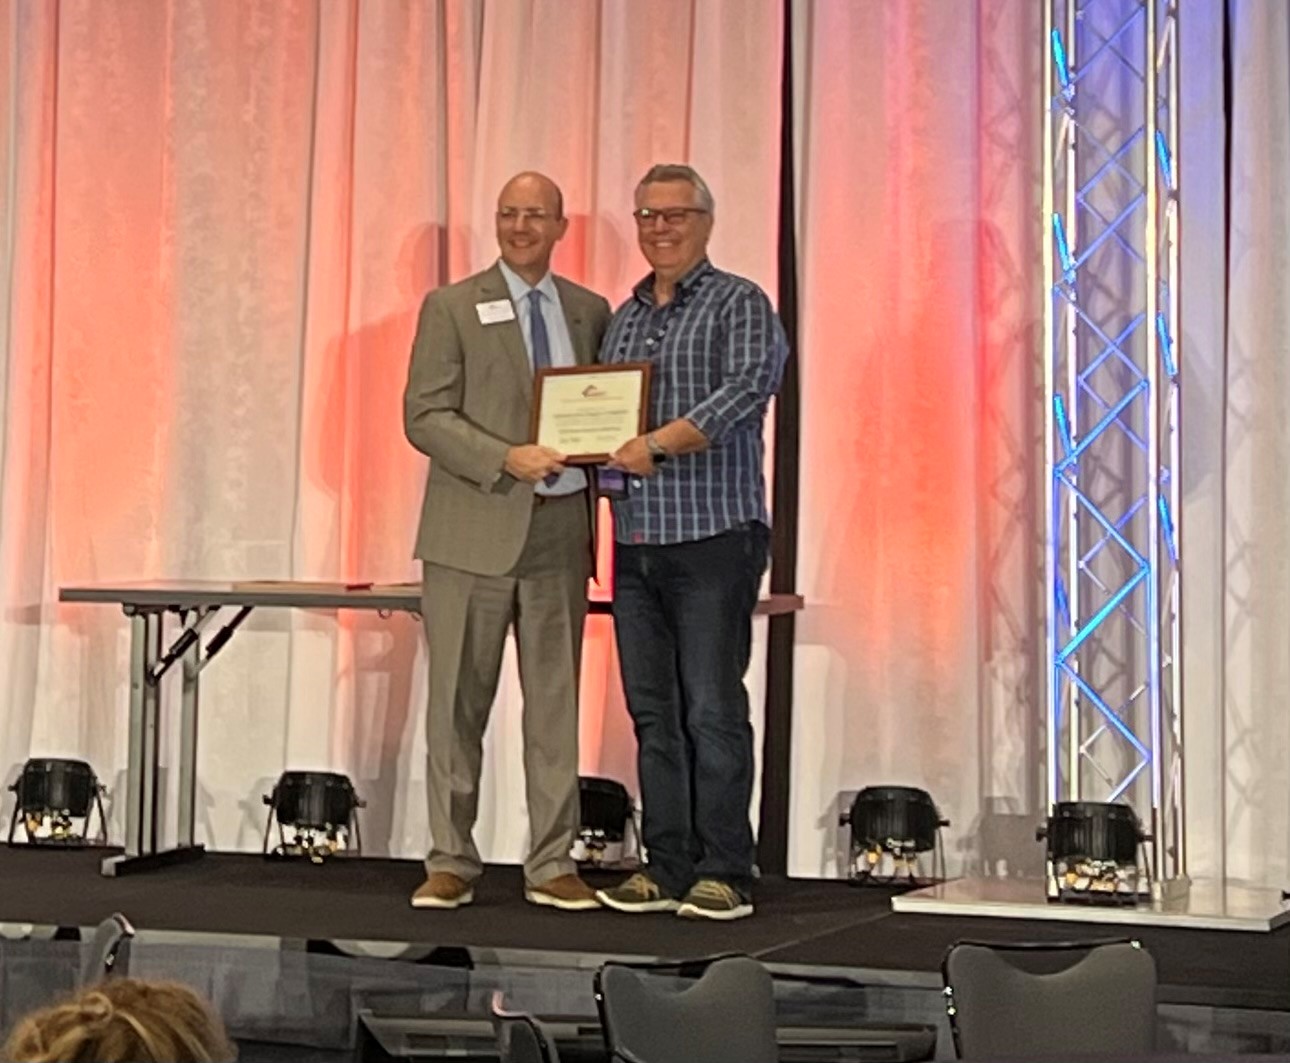 Bob Preston, Past President, receives the NARPM State Chapter of the Year award on behalf of CalNARPM at the 2021 National Convention